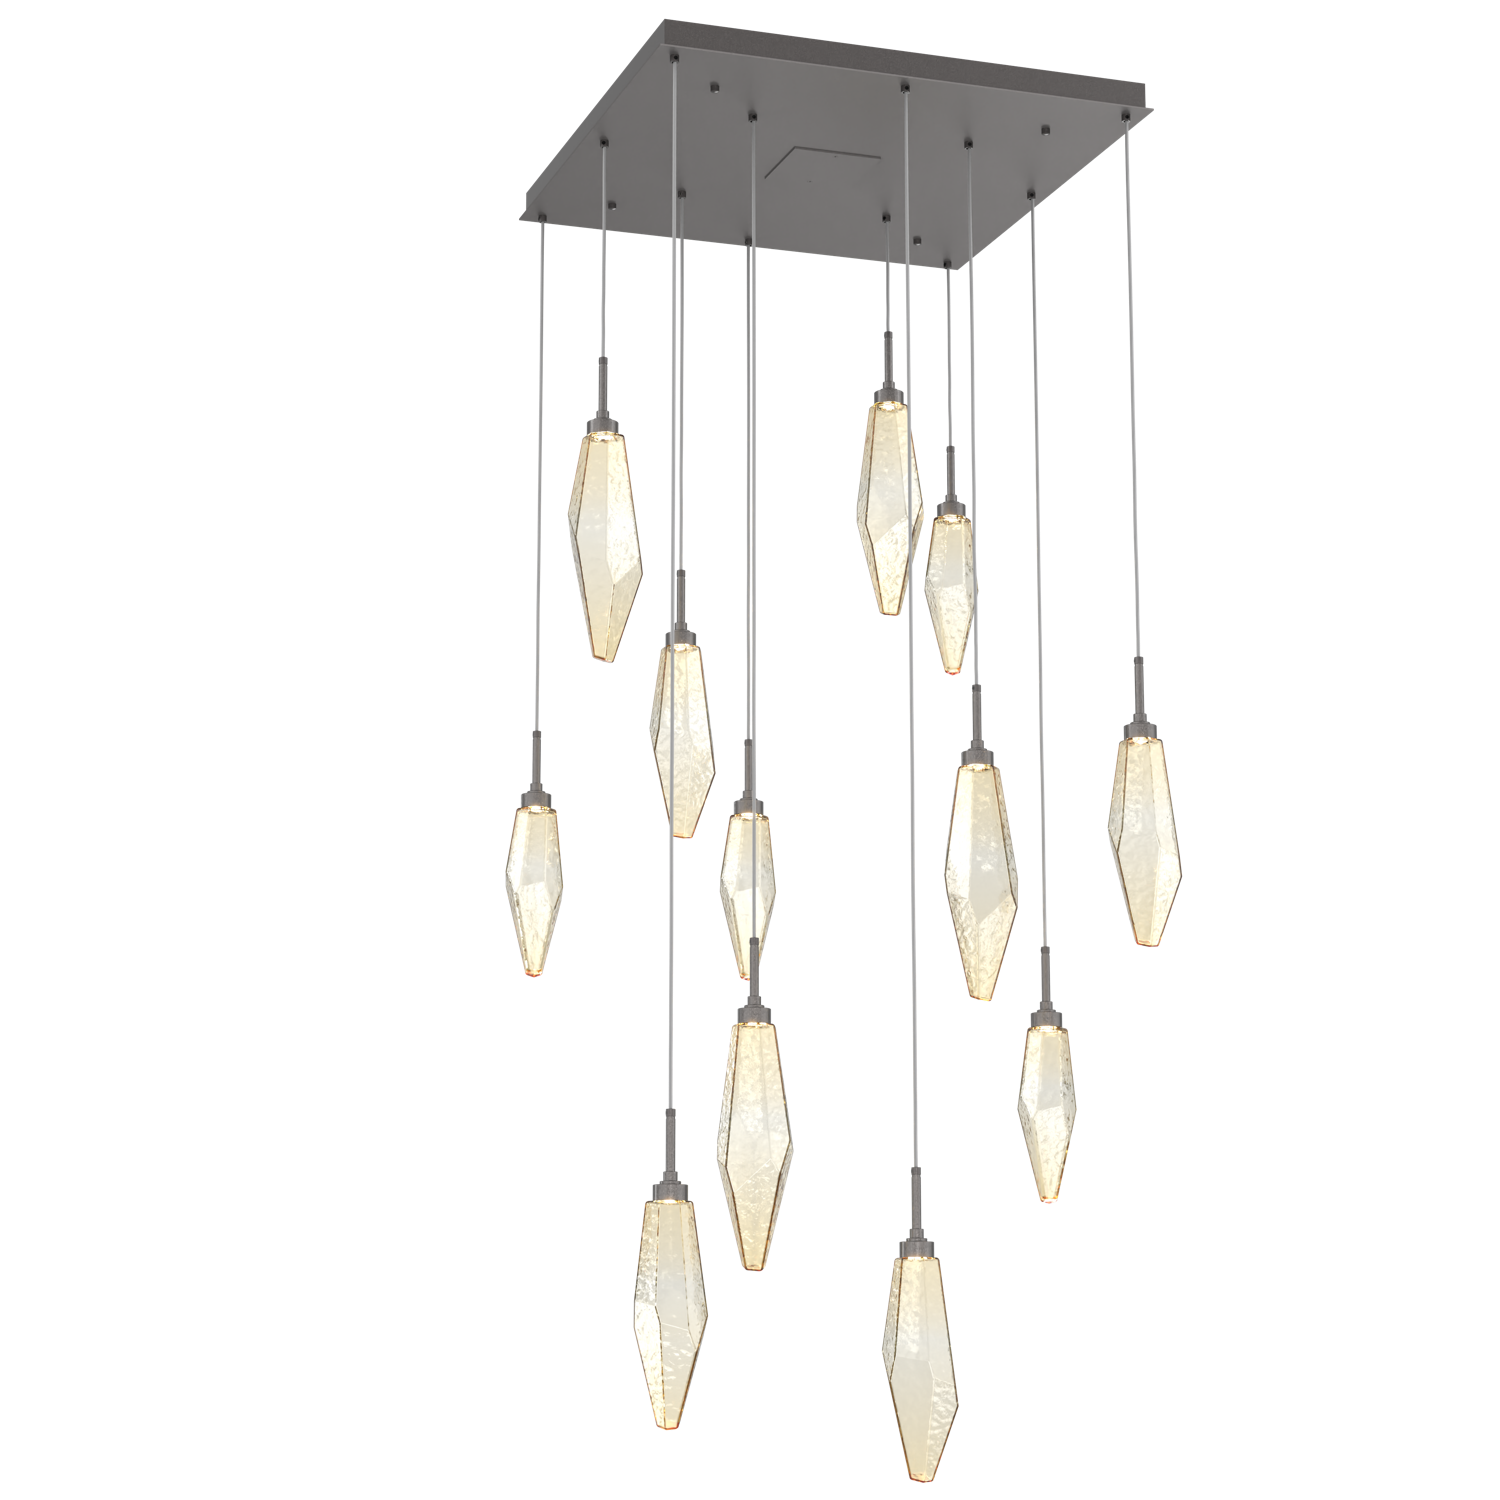 CHB0050-12-GP-CA-Hammerton-Studio-Rock-Crystal-12-light-square-pendant-chandelier-with-graphite-finish-and-chilled-amber-blown-glass-shades-and-LED-lamping